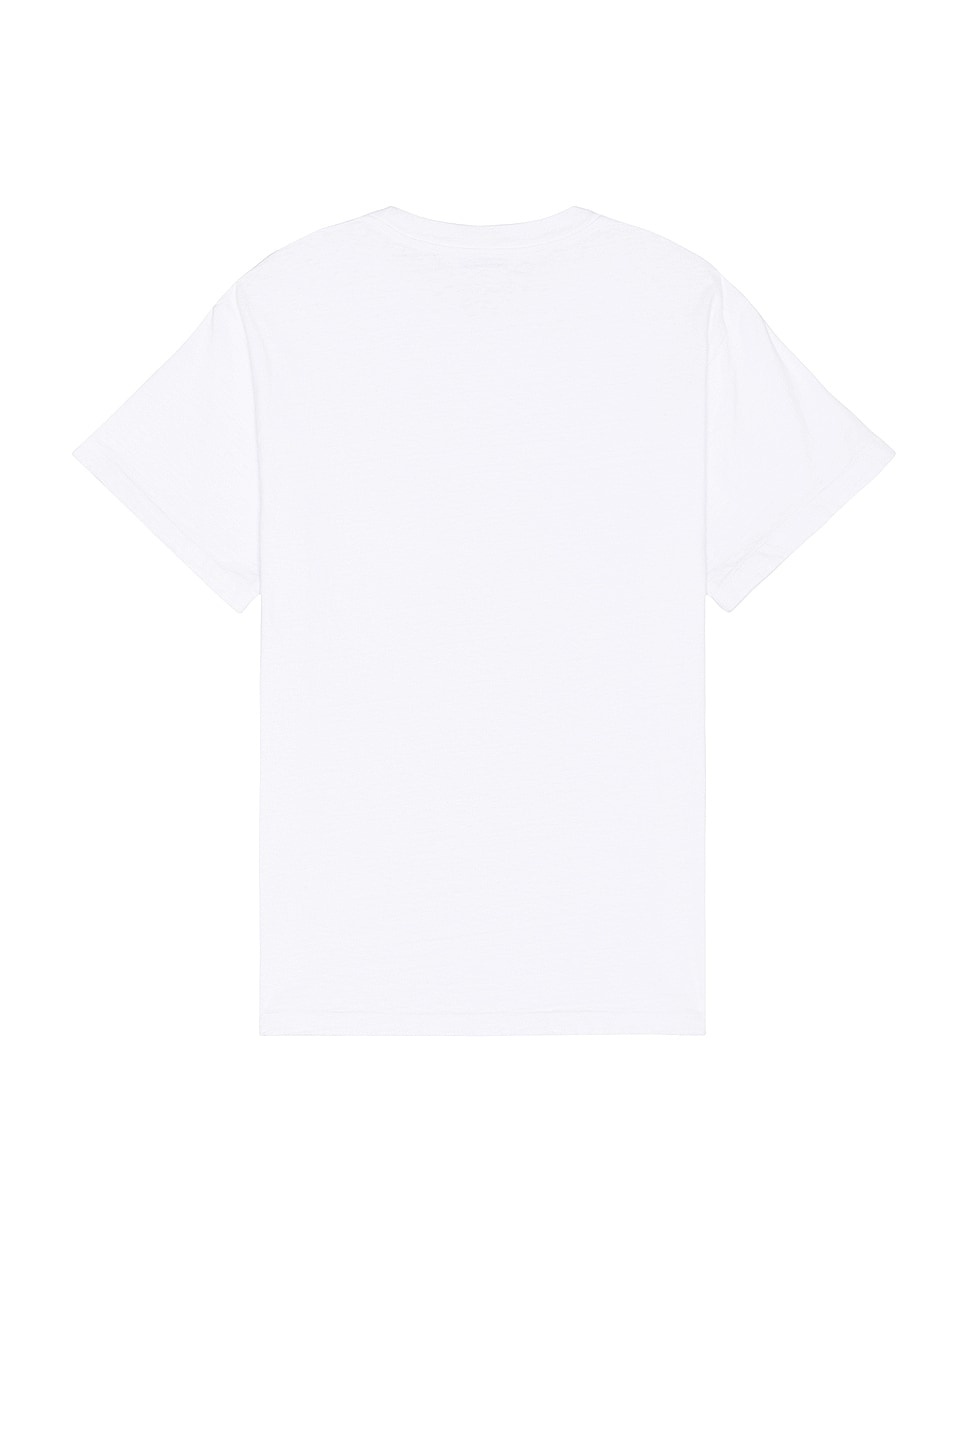 Cropped Campus Pocket Tee - 2